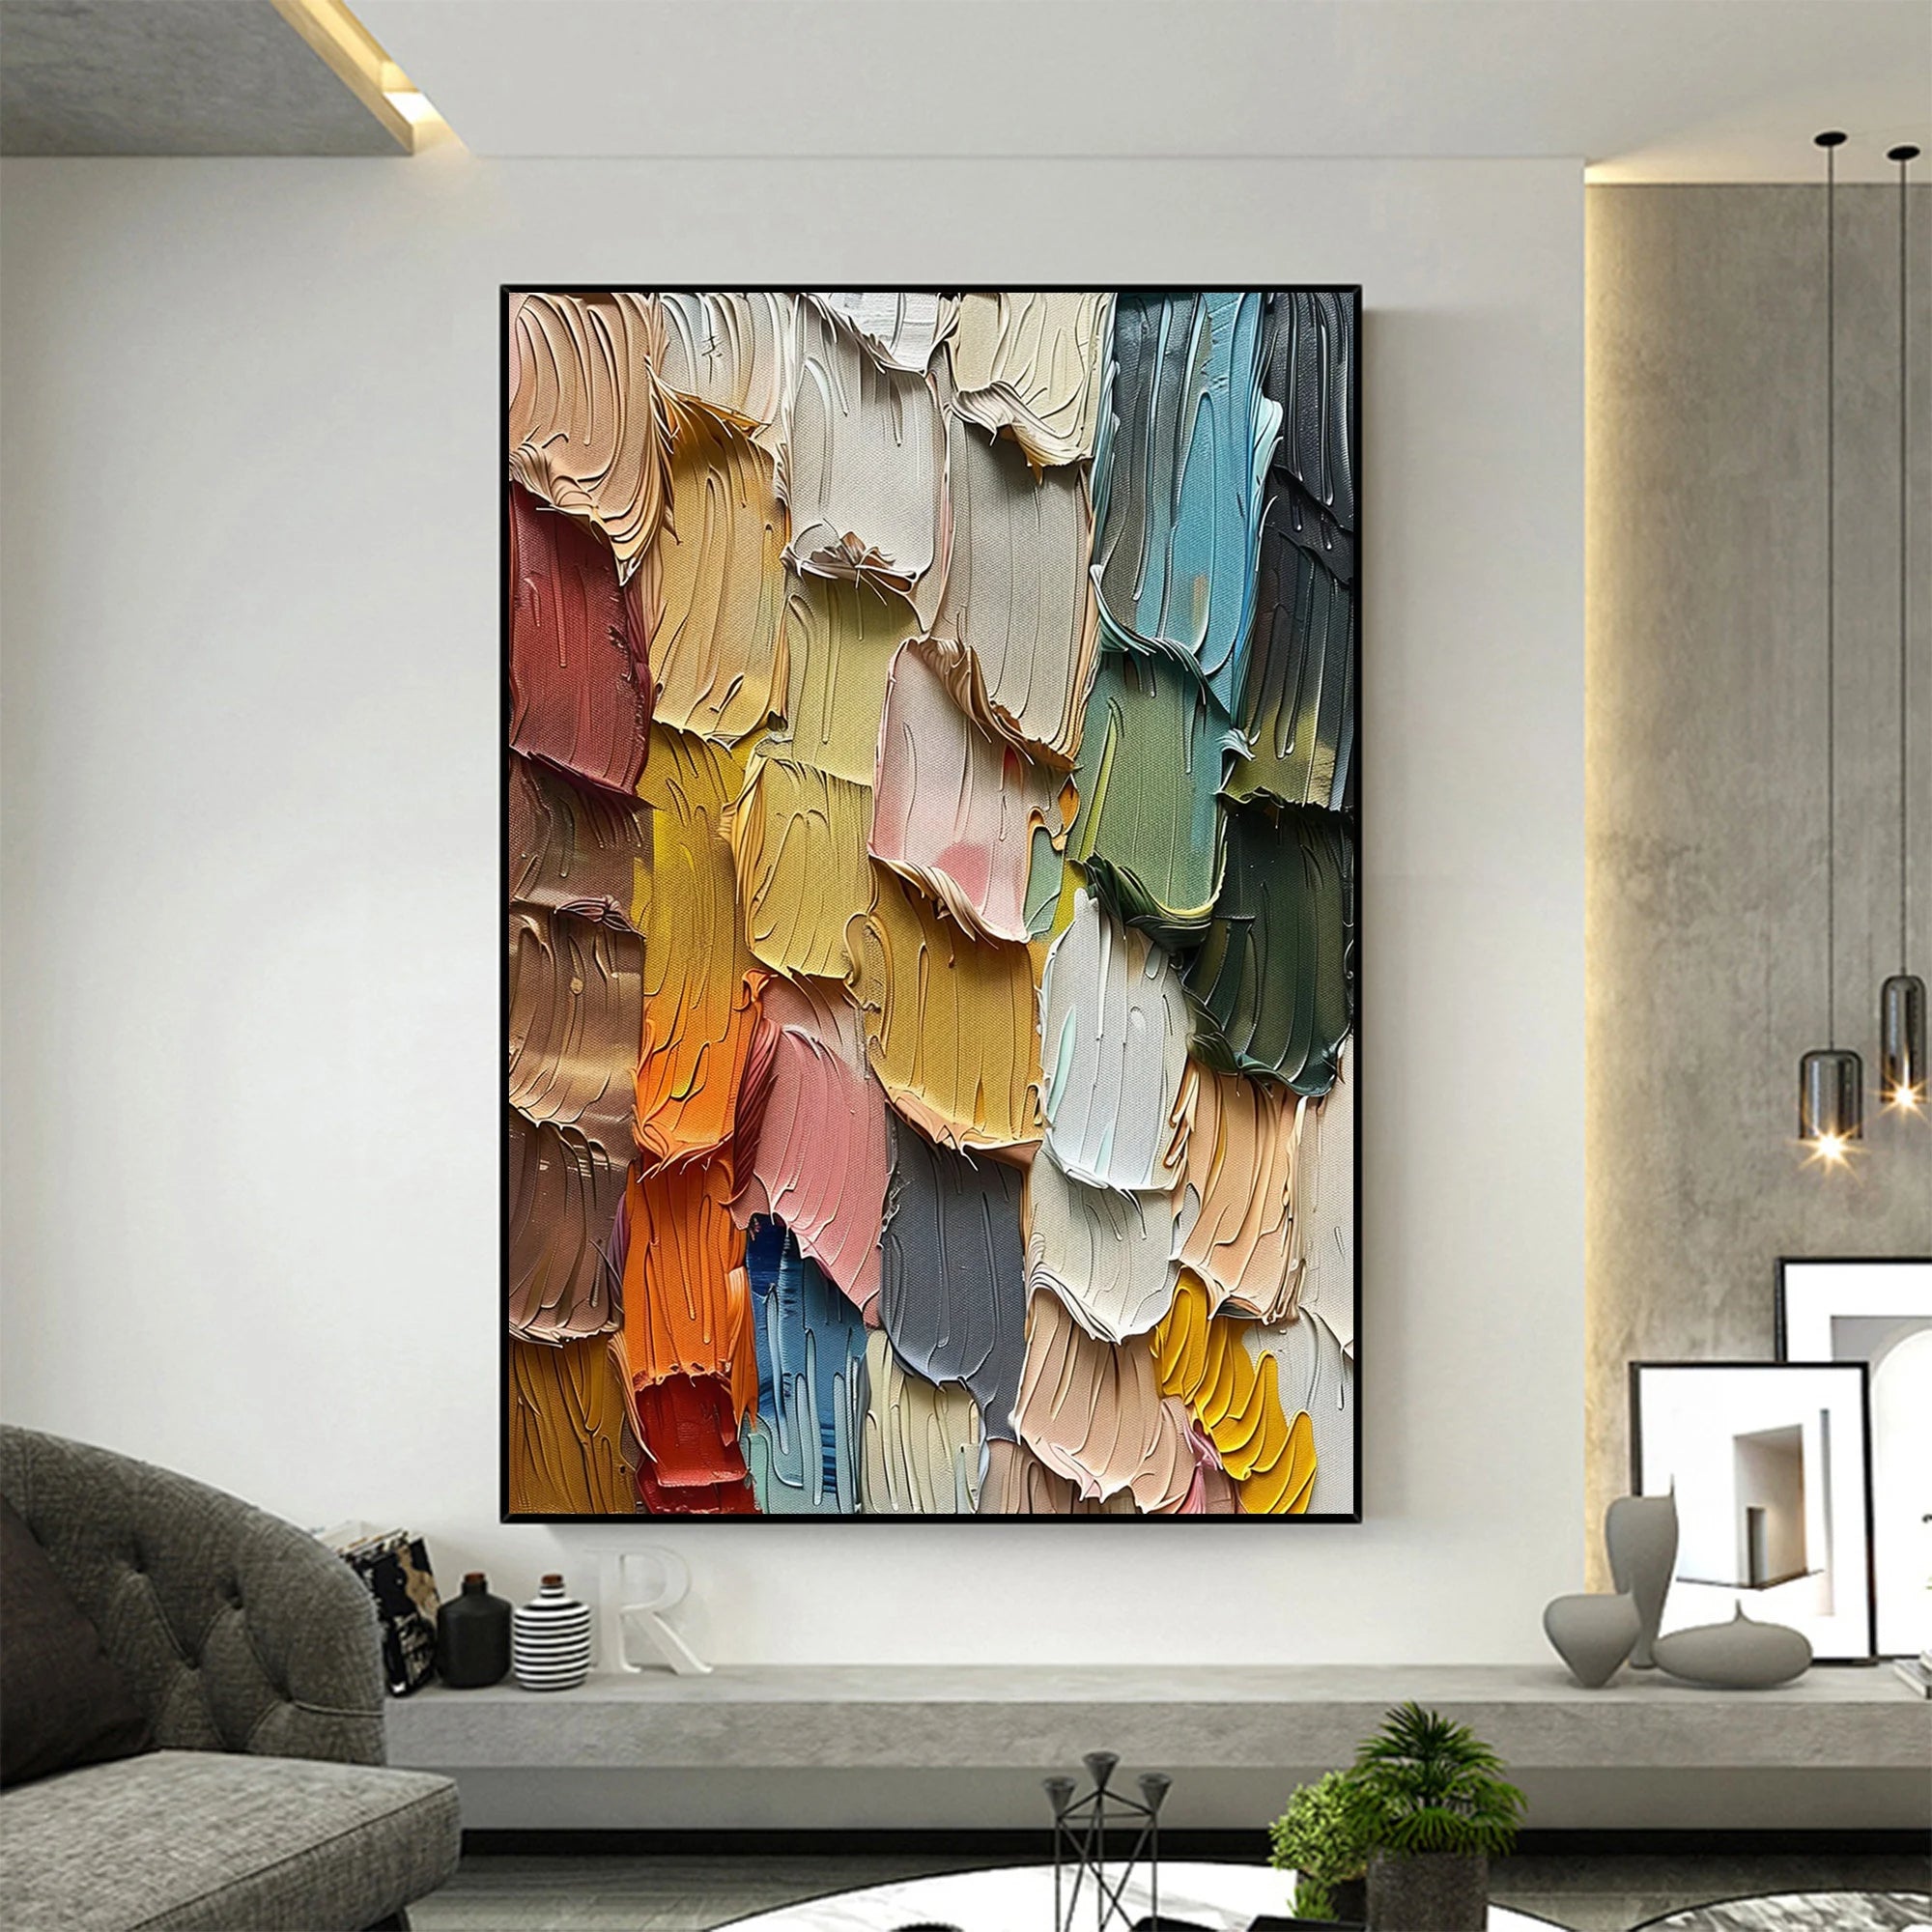 Vibrant Strokes: Personalizing Space with Custom Oil Paintings